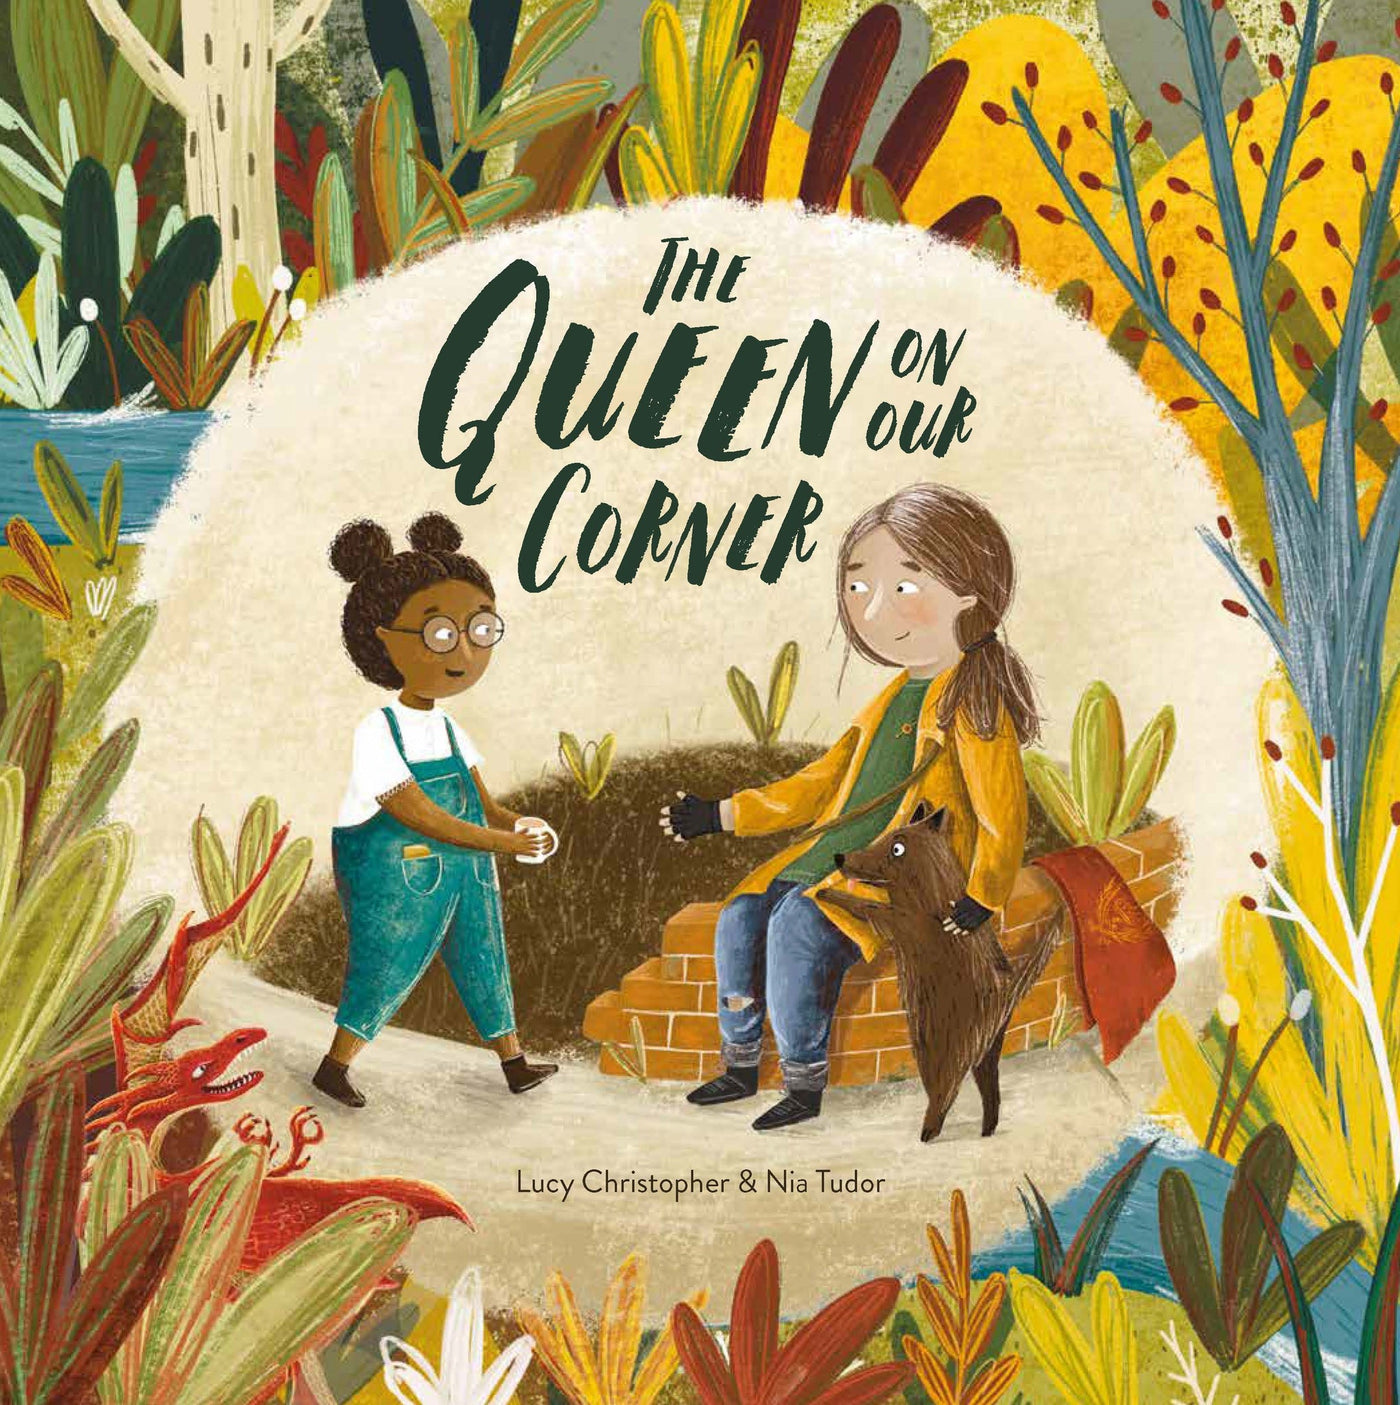 The Queen on our Corner: Diverse & Inclusive Children's Book by LANTANA